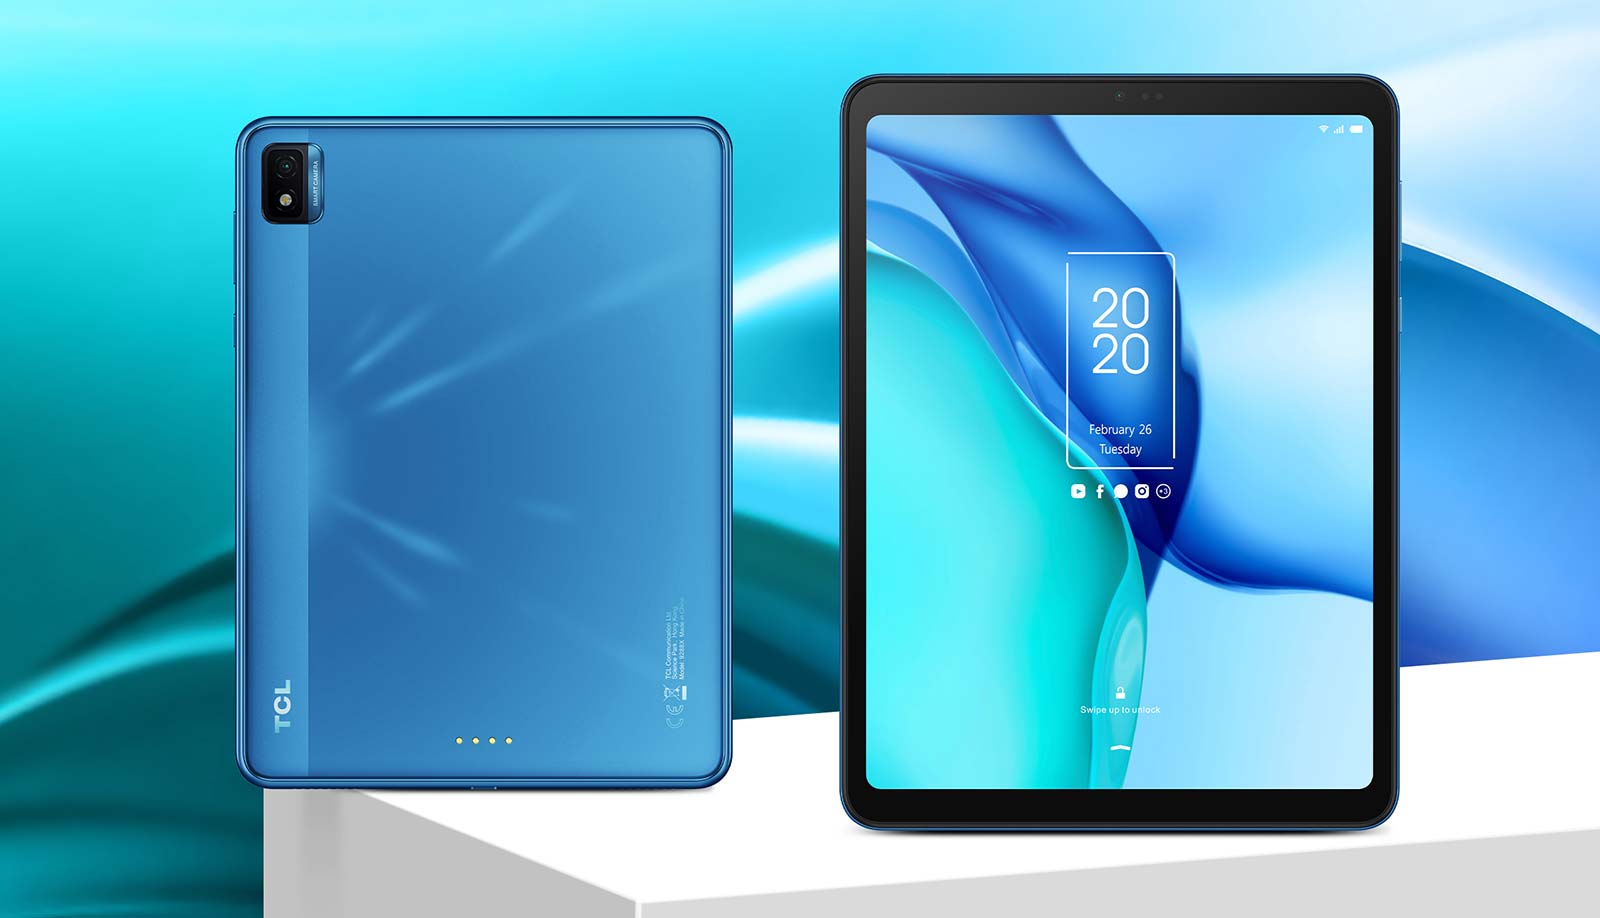 TCL's NxtPaper tablet at CES 2021